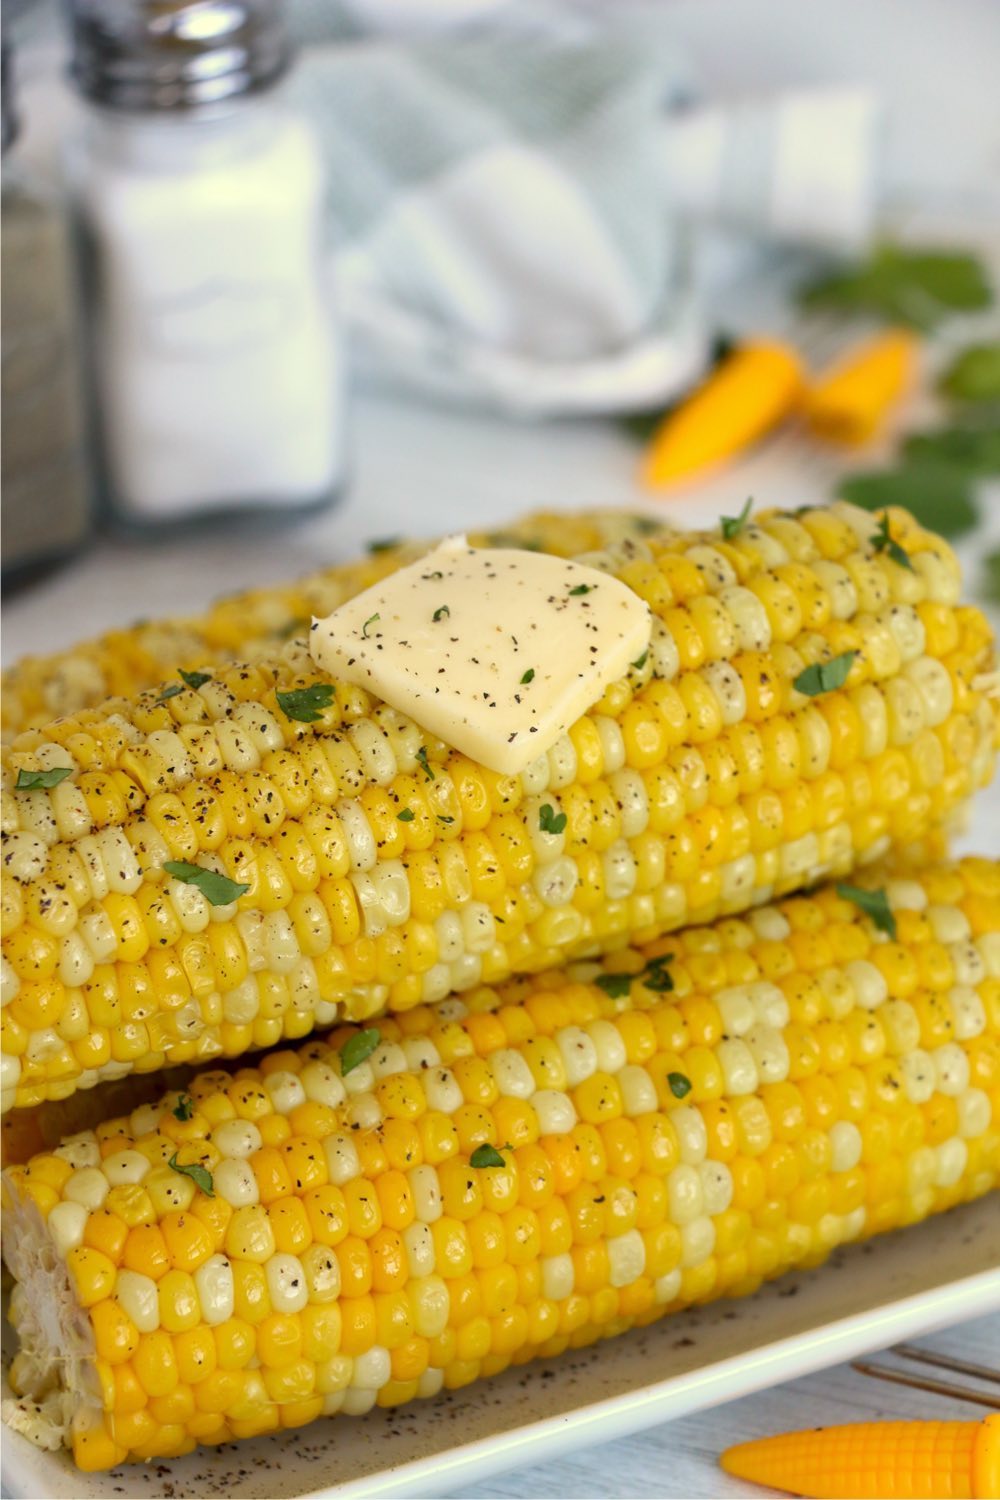 Stack of corn on the cob with butter and parsley garnish